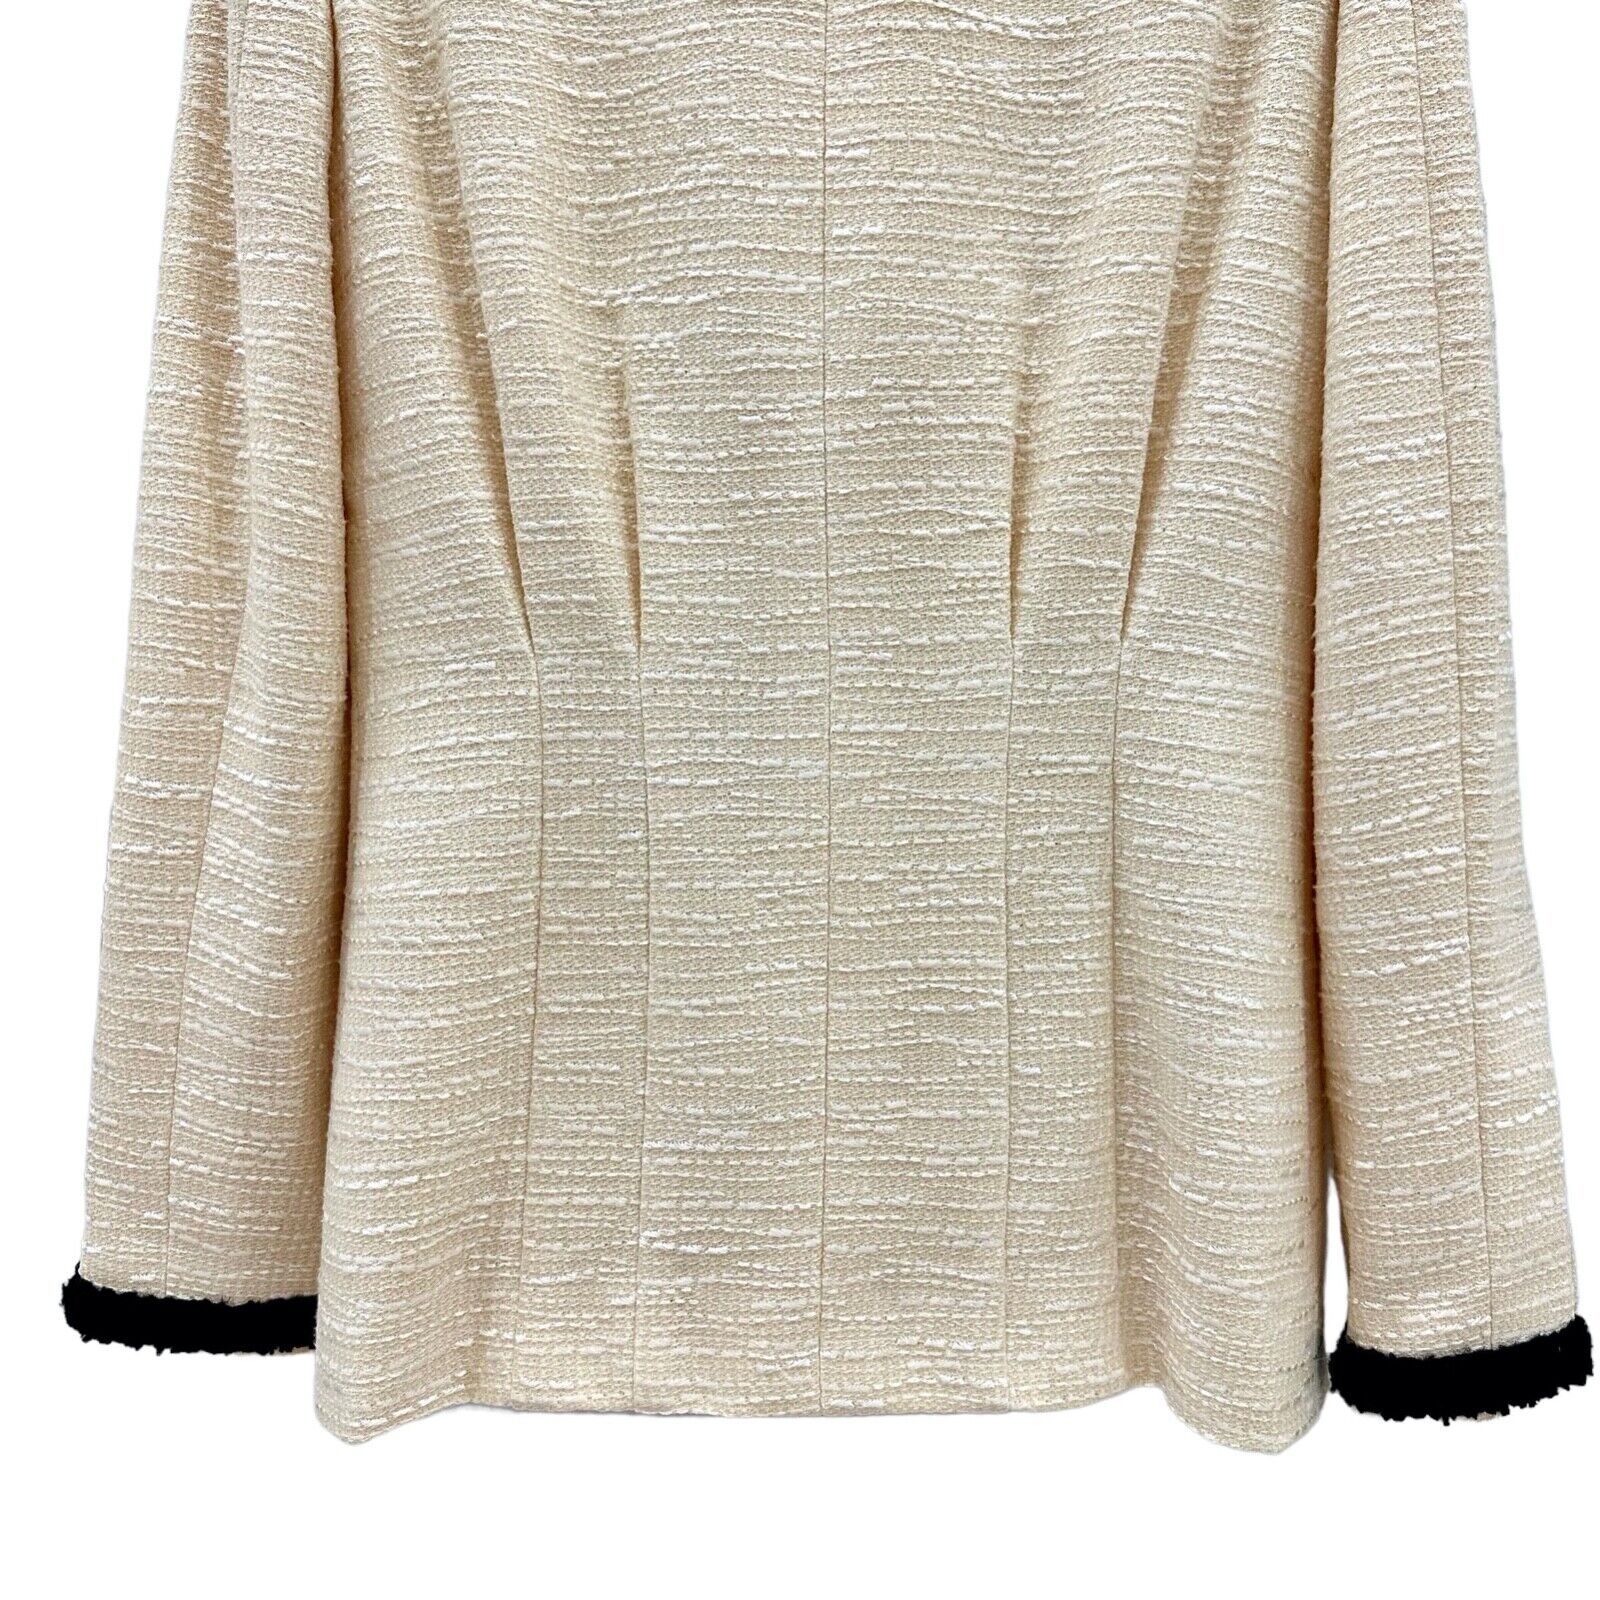 Chanel Ivory and Black Tweed Jacket - BOUTIQUE PURCHASE PRICE –  PauméLosAngeles